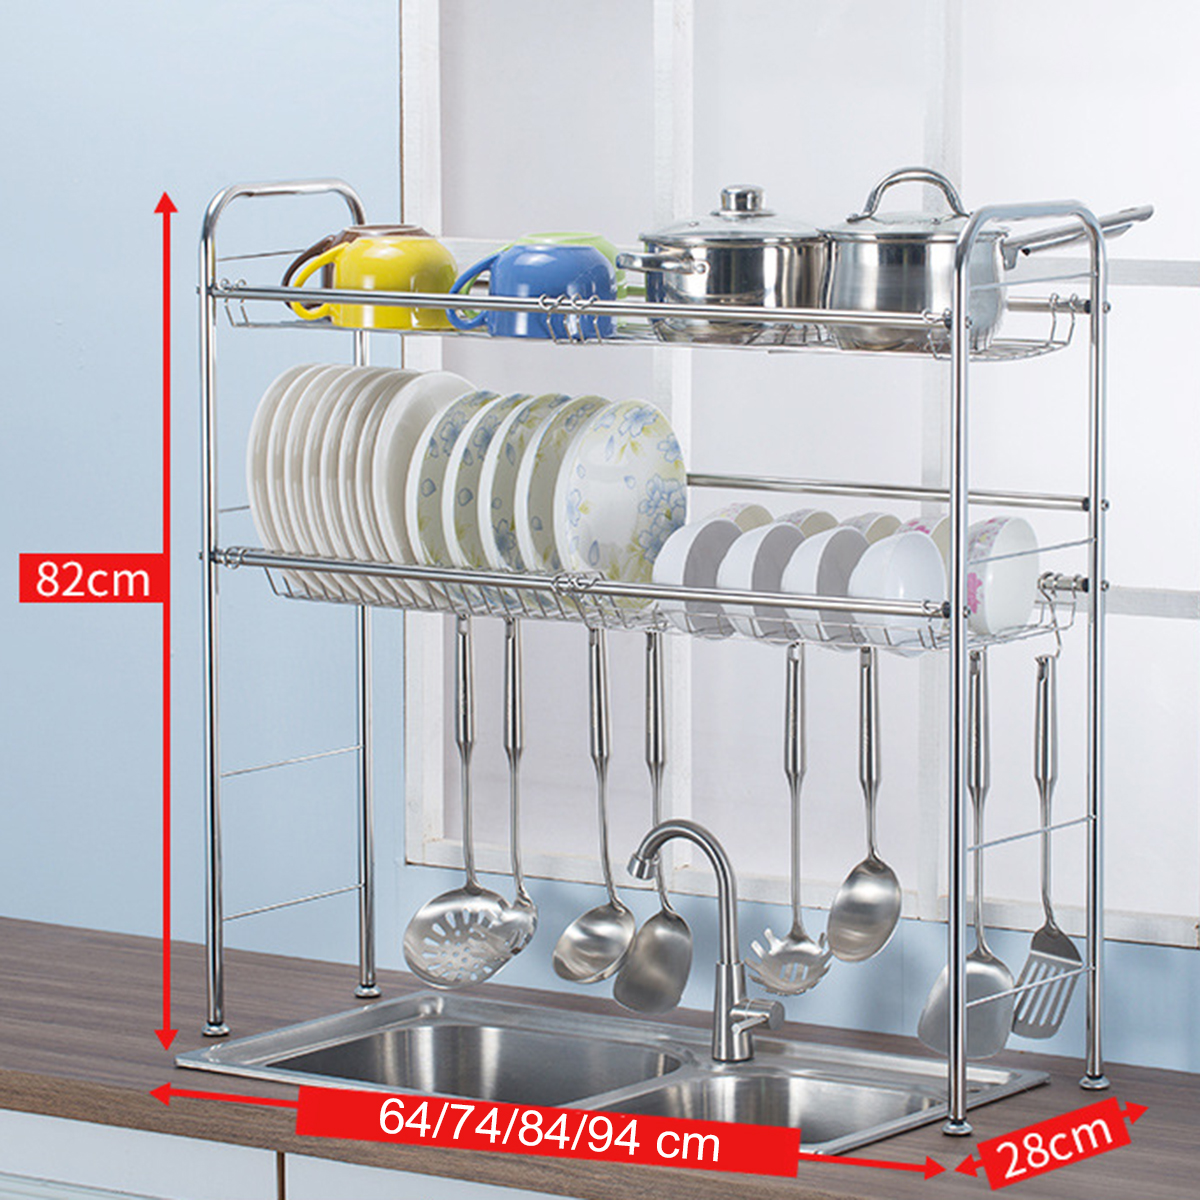 2-Tiers-Stainless-Steel-Dishes-Rack-Dual-Sink-Drain-Rack-Adjustable-Multi-use-Kitchen-Organizer-Rack-1661464-4